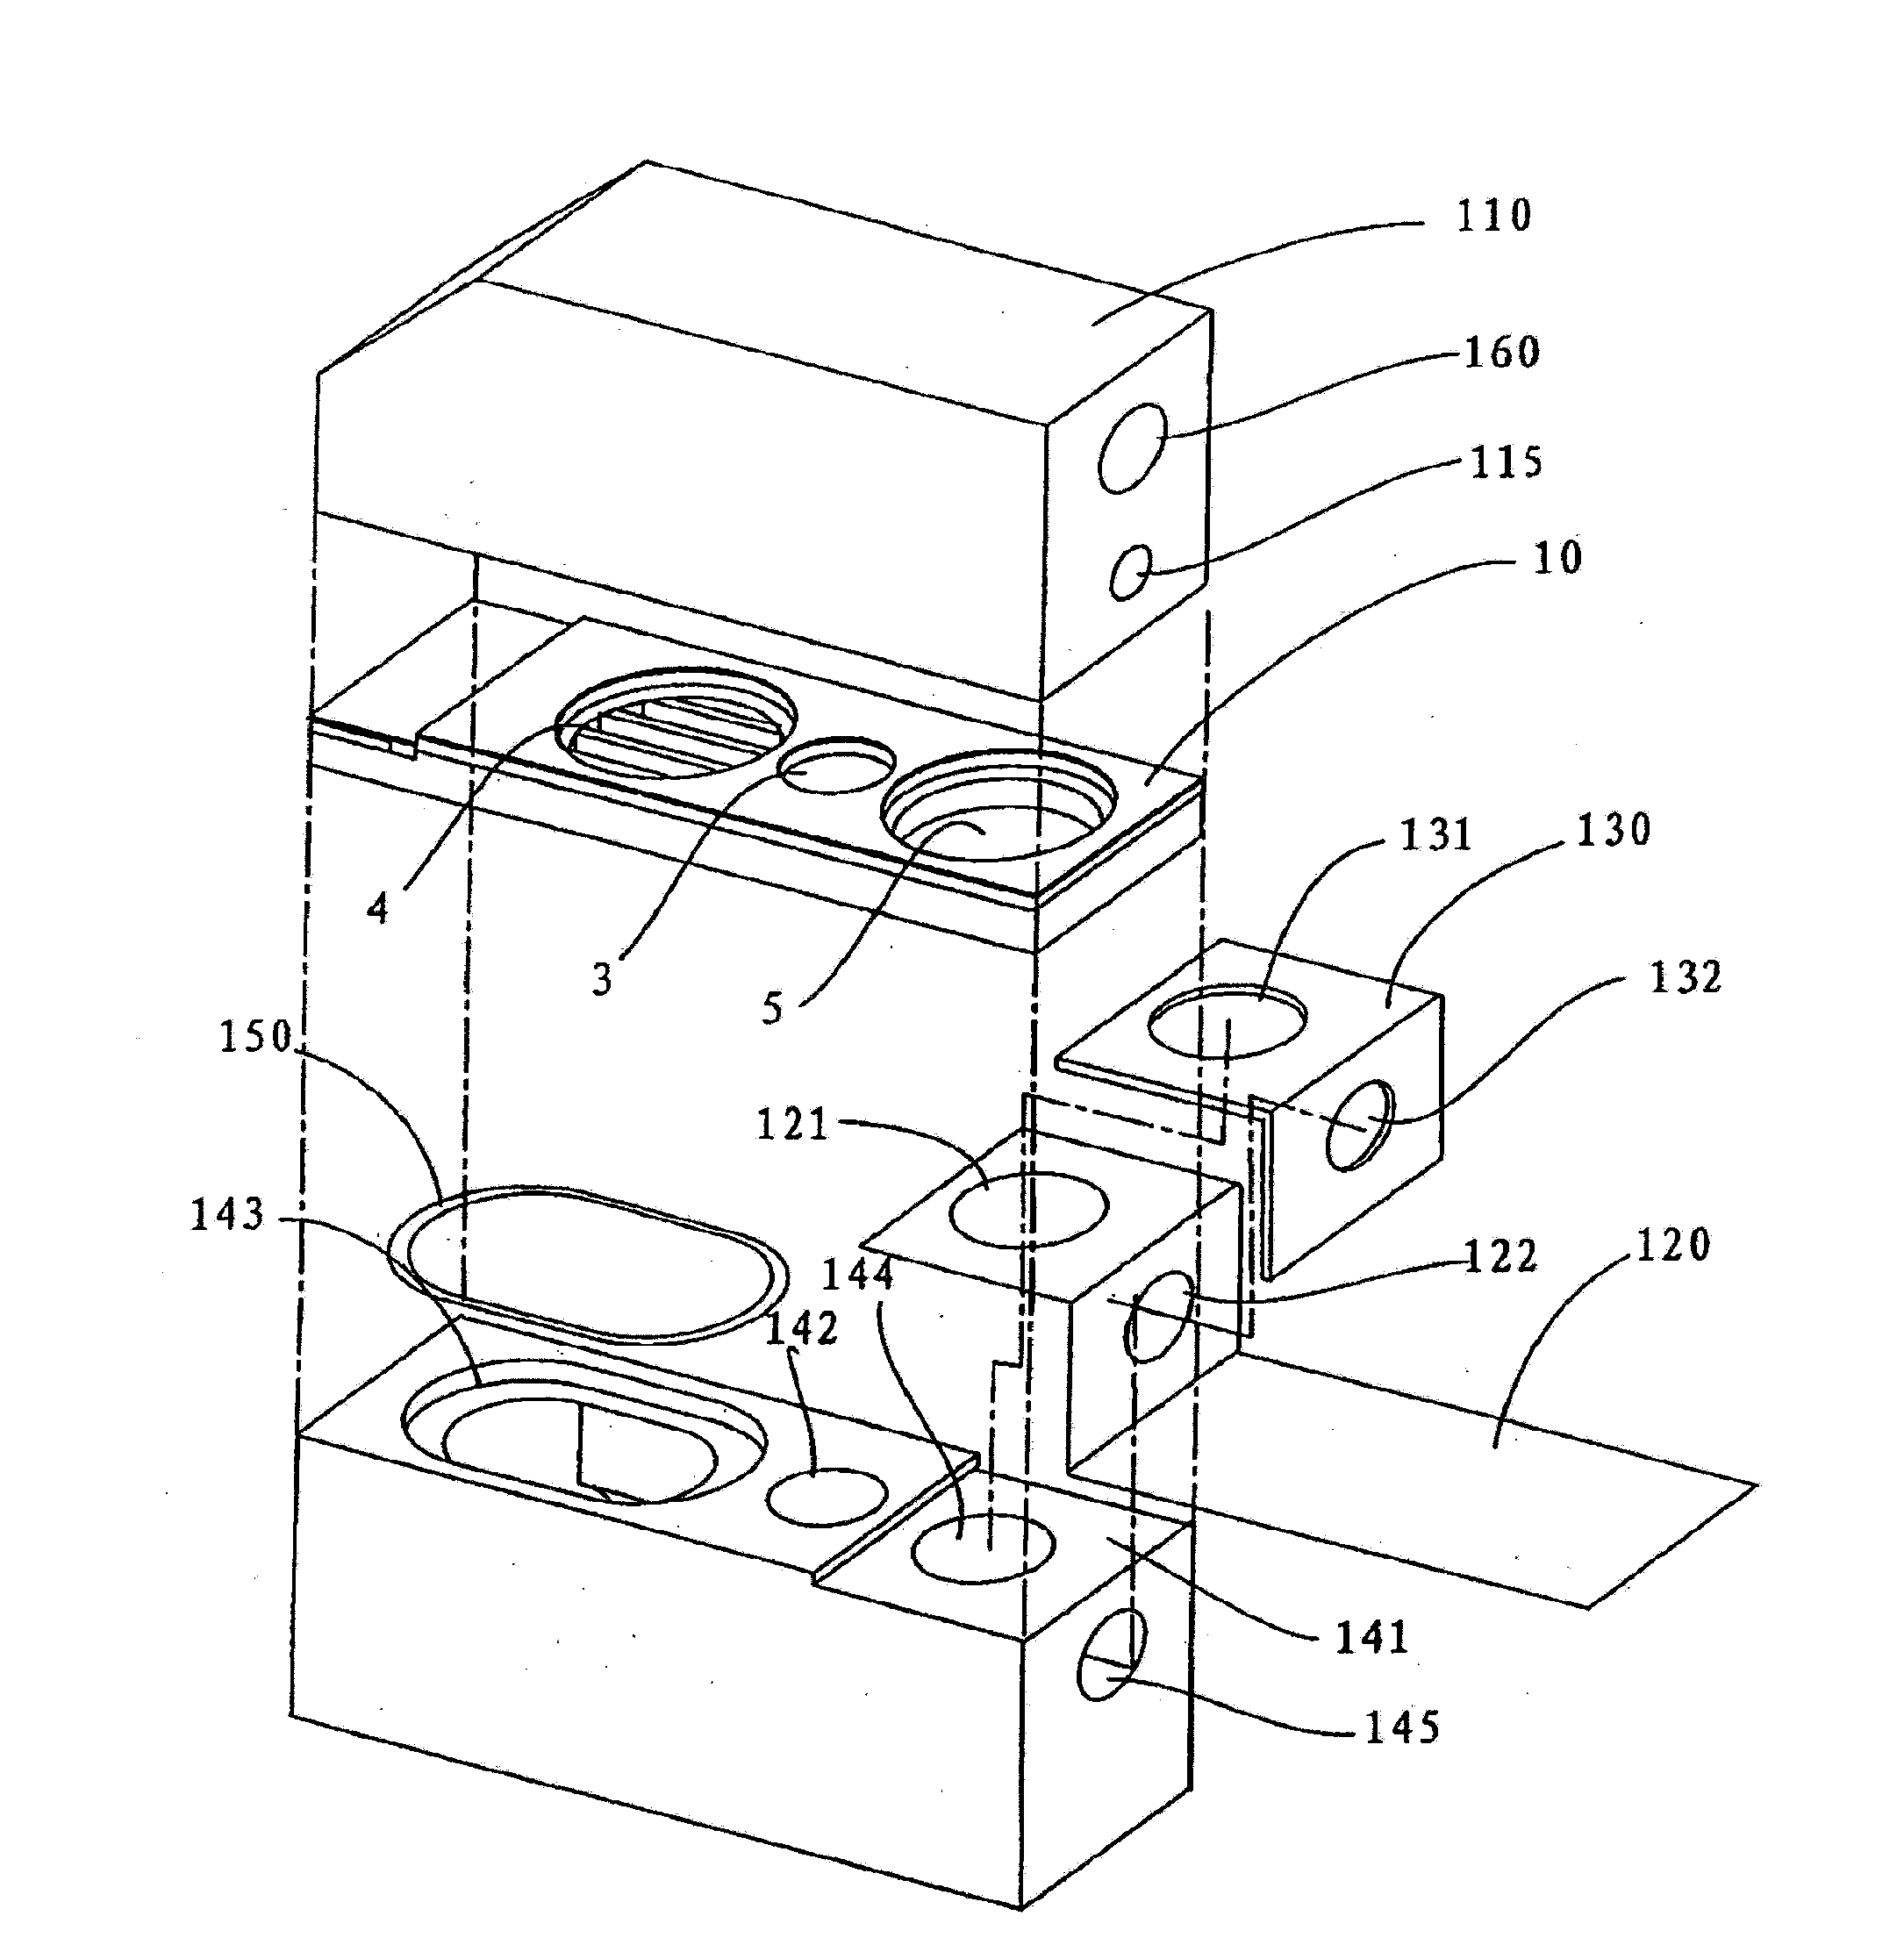 Cooling module for laser, fabricating method thereof, and semiconductor laser fabricated from the module